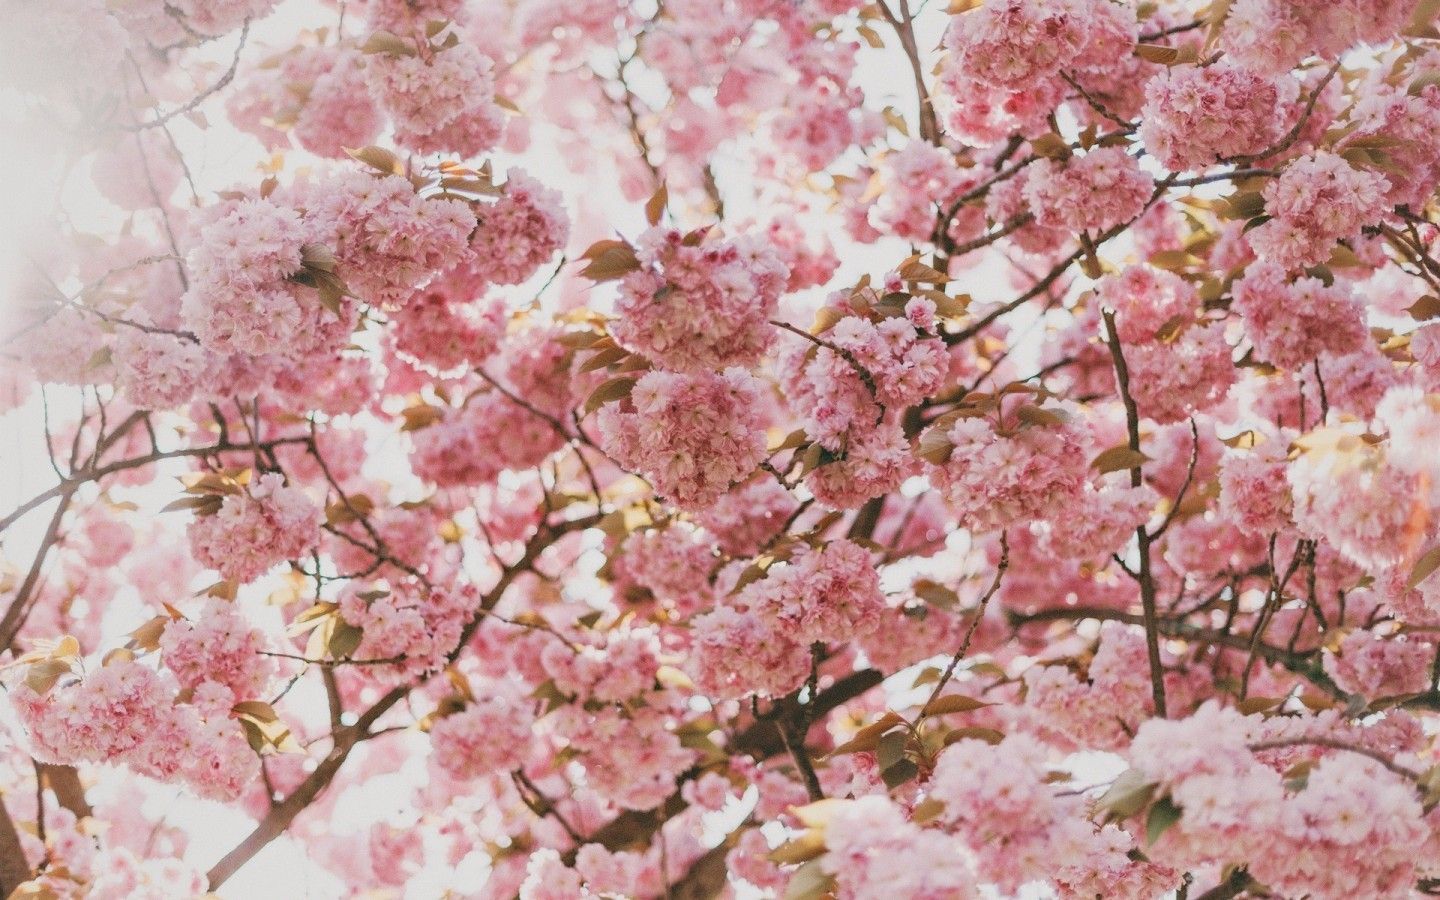 Download 1440x900 Sakura Blossom, Cherry, Tree, Pink Flowers, Branches Wallpaper for MacBook Pro 15 inch, MacBook Air 13 inch